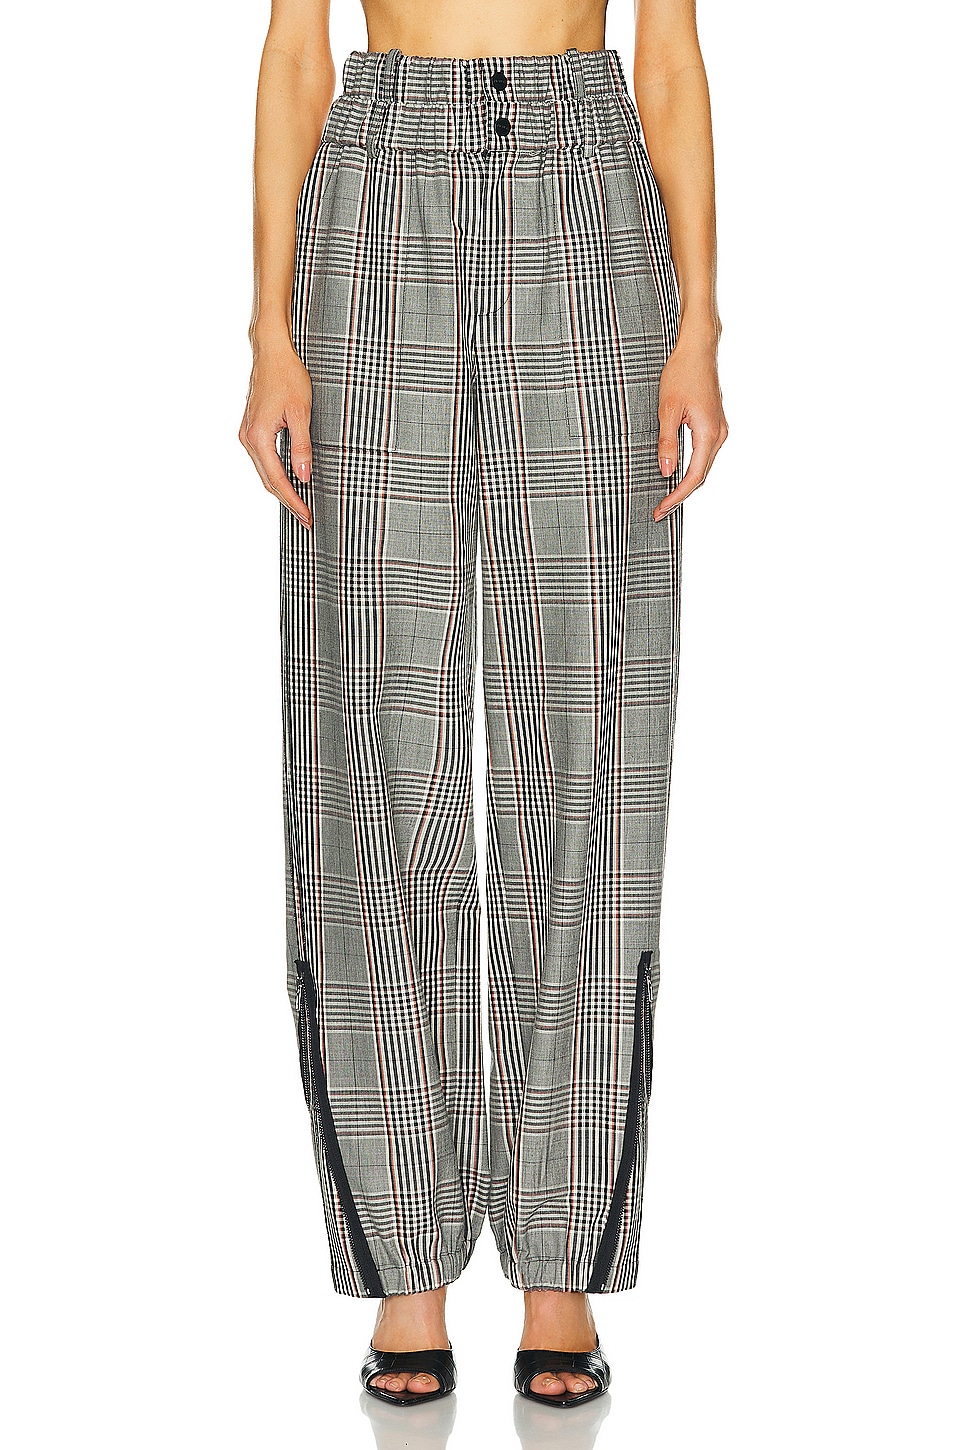 Image 1 of Monse Plaid Double Waistband Zipper Detailed Pant in Black Multi